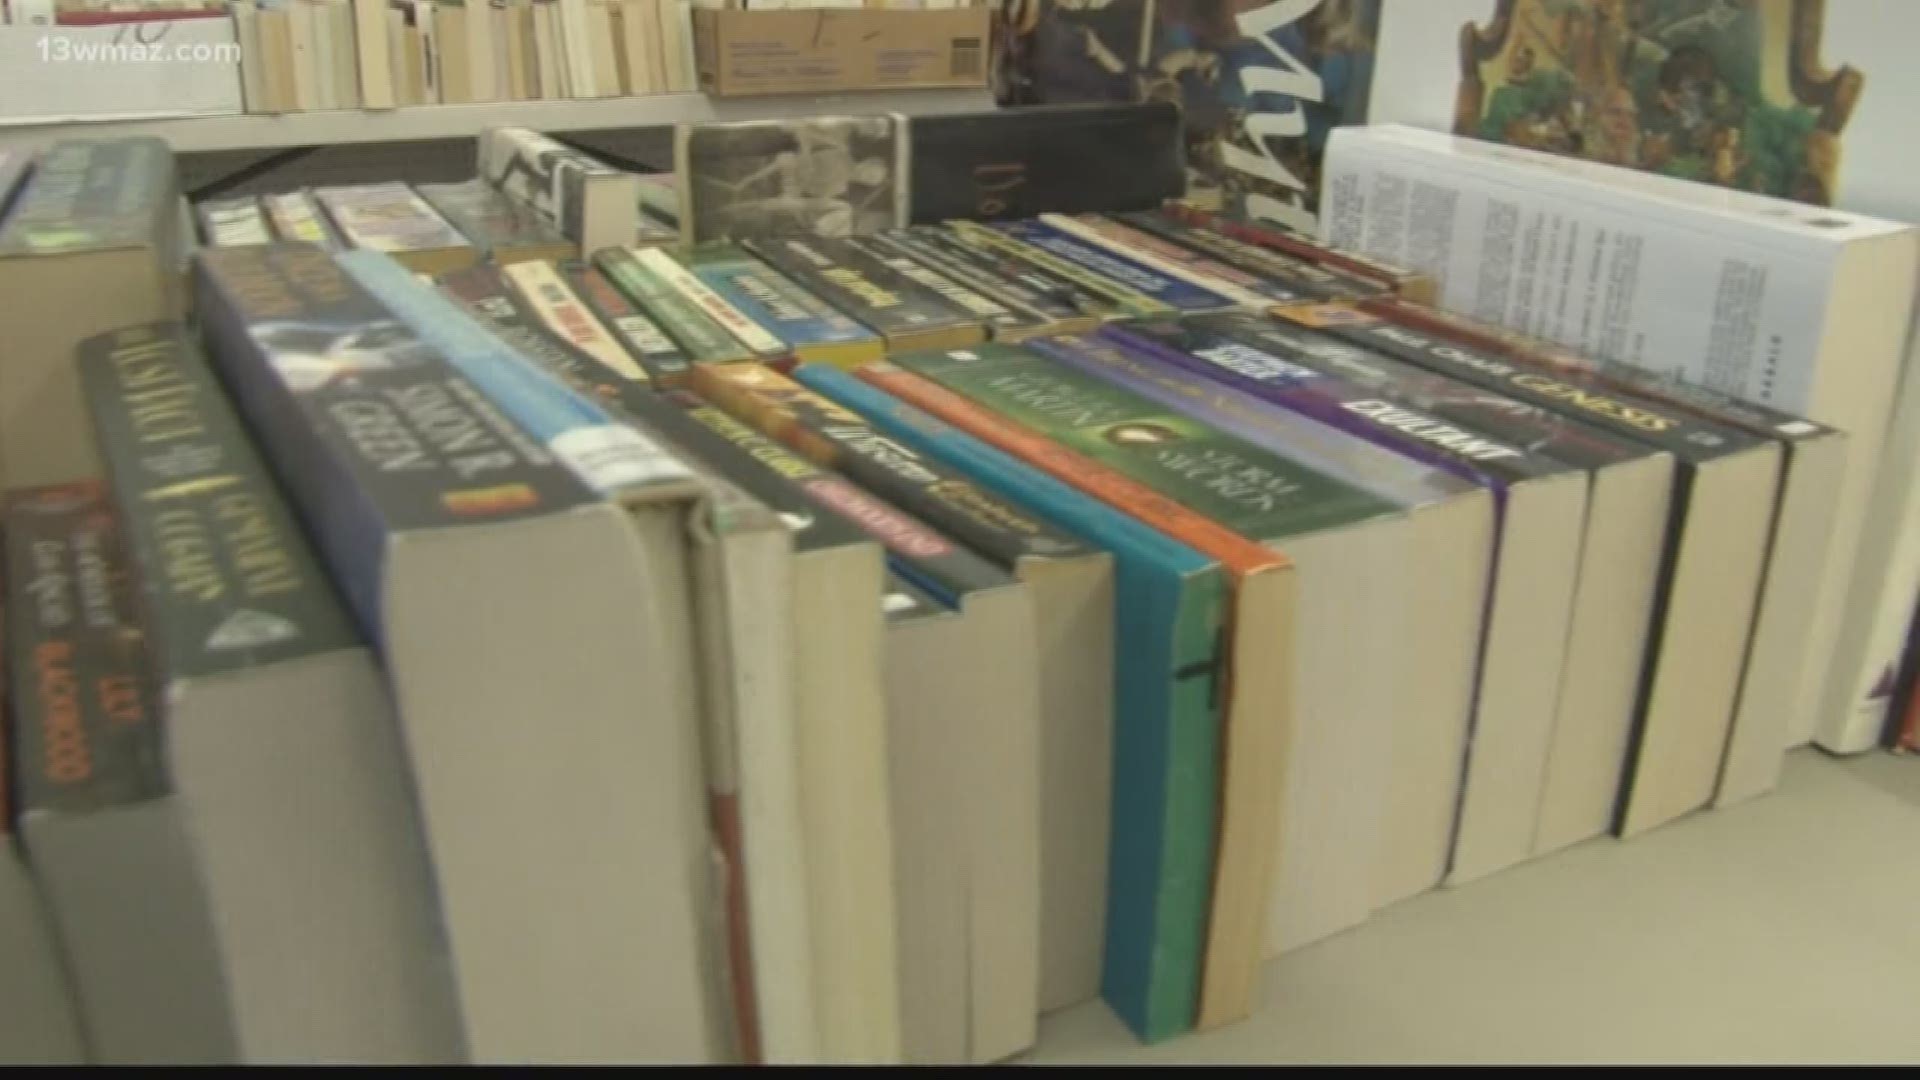 For all you book lovers in Central Georgia, heads up! Thousands of books will be on sale this week for as little as $1. Junior Journalist Ava Trussell has the details on Bibb County's 51st annual Friends of the Library Book Sale.